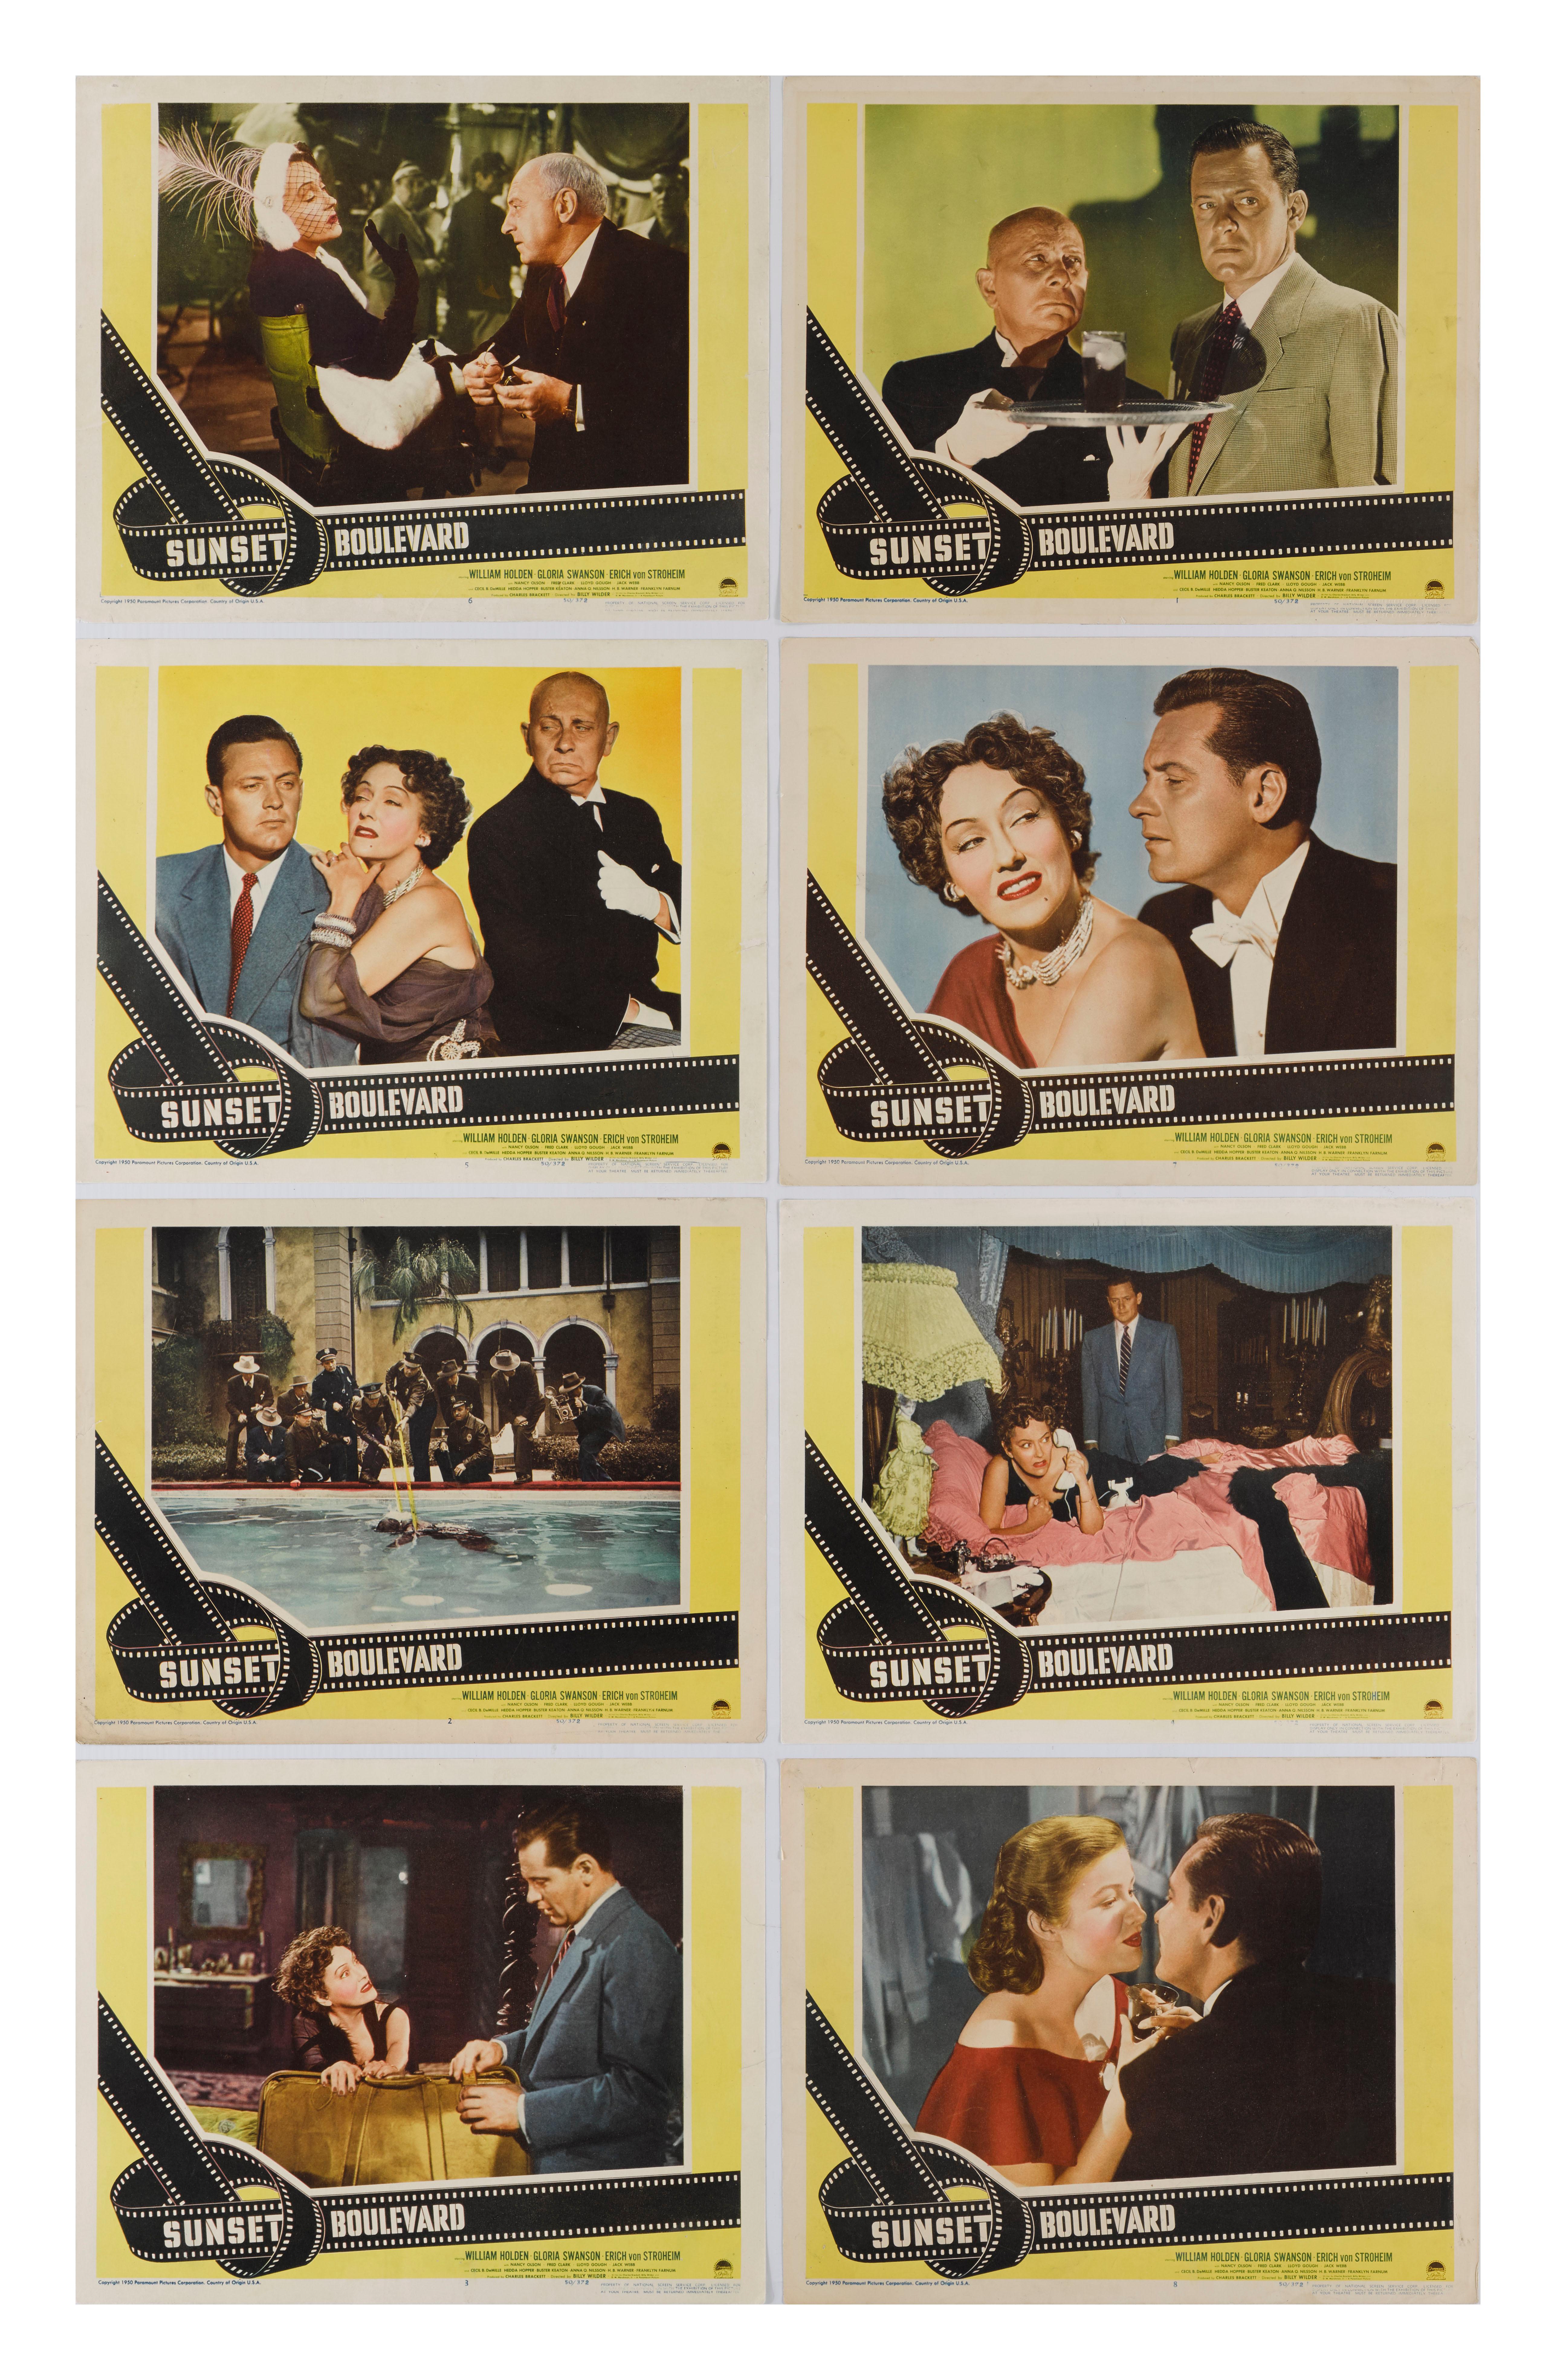 Original US full set of 8 lobby cards for this American film noir directed and co-written by Billy Wilder, and produced and co-written by Charles Brackett. The film stars William Holden, Gloria Swanson and Errich von Stroheim. The film was nominated